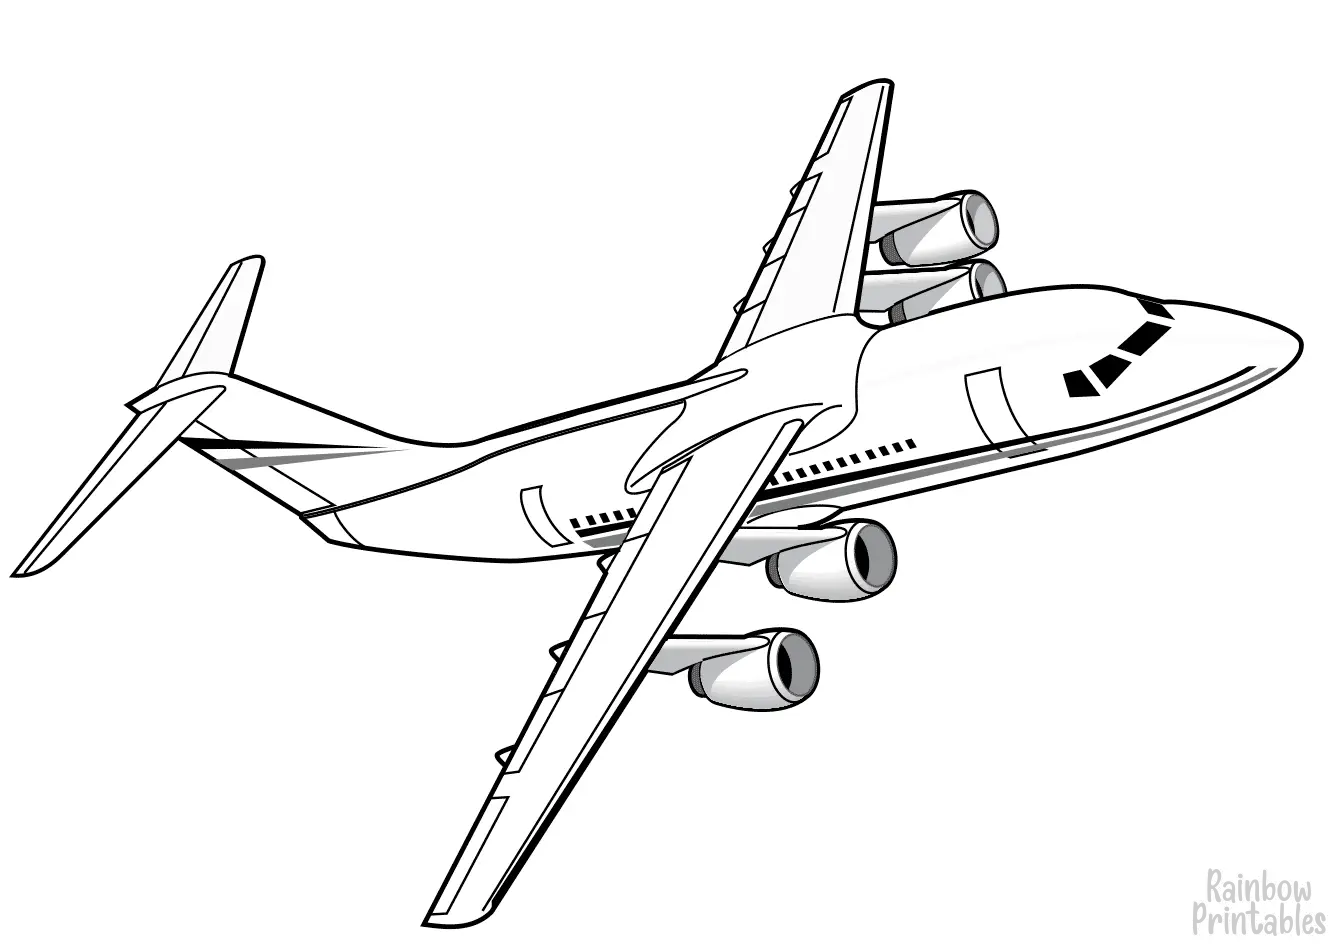 BIPLANE AIRPLANE AIRLINER AEROSPACE Clipart Coloring Pages for Kids Adults Art Activities Line Art